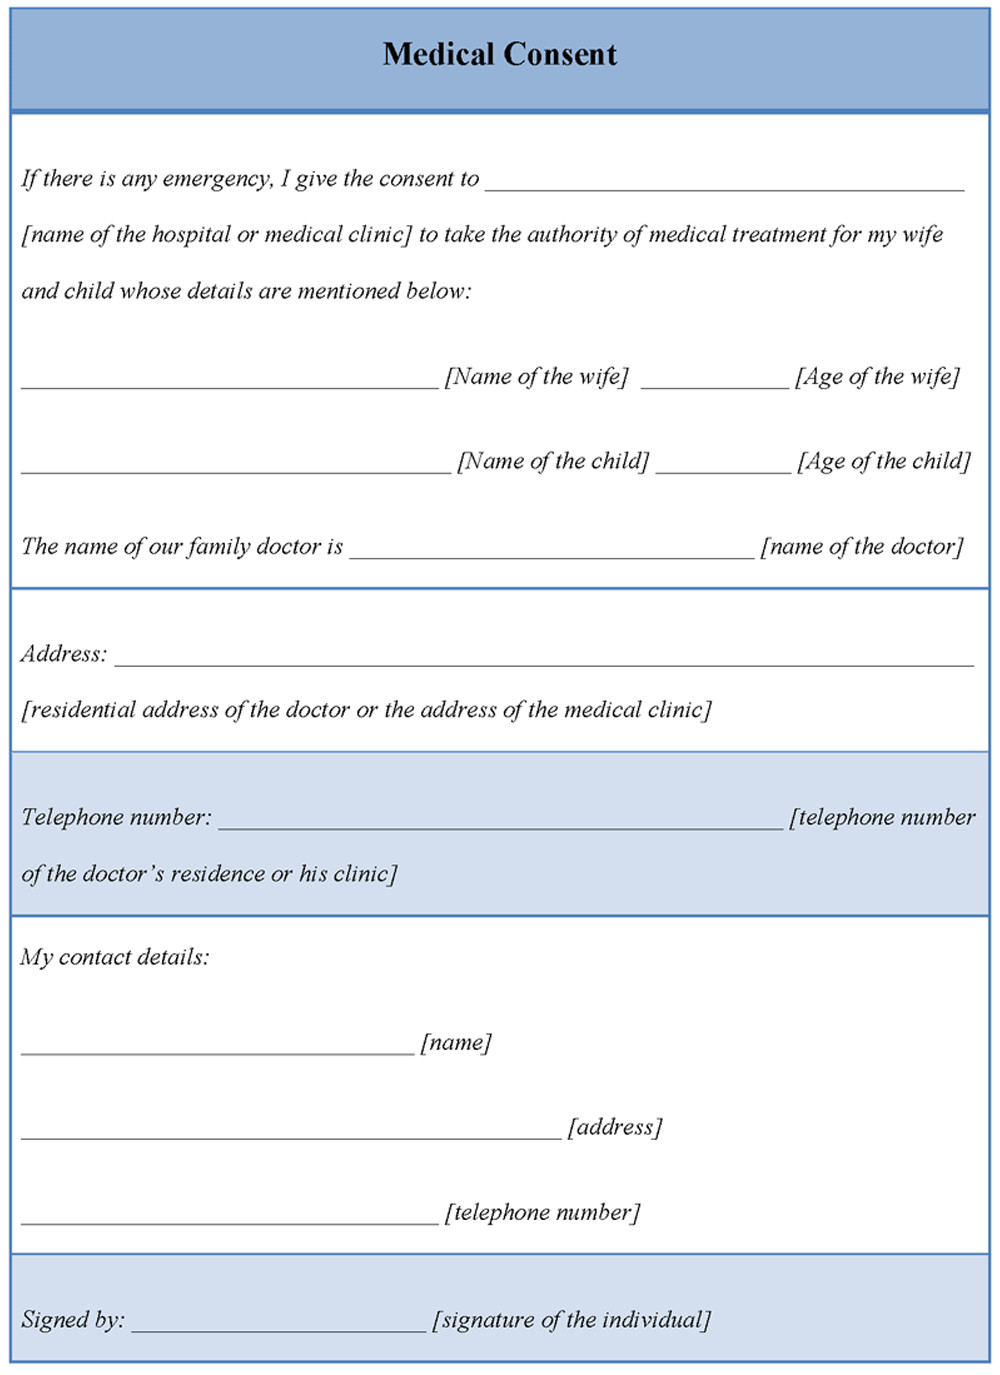 Medical Template for Consent Form Example of Medical